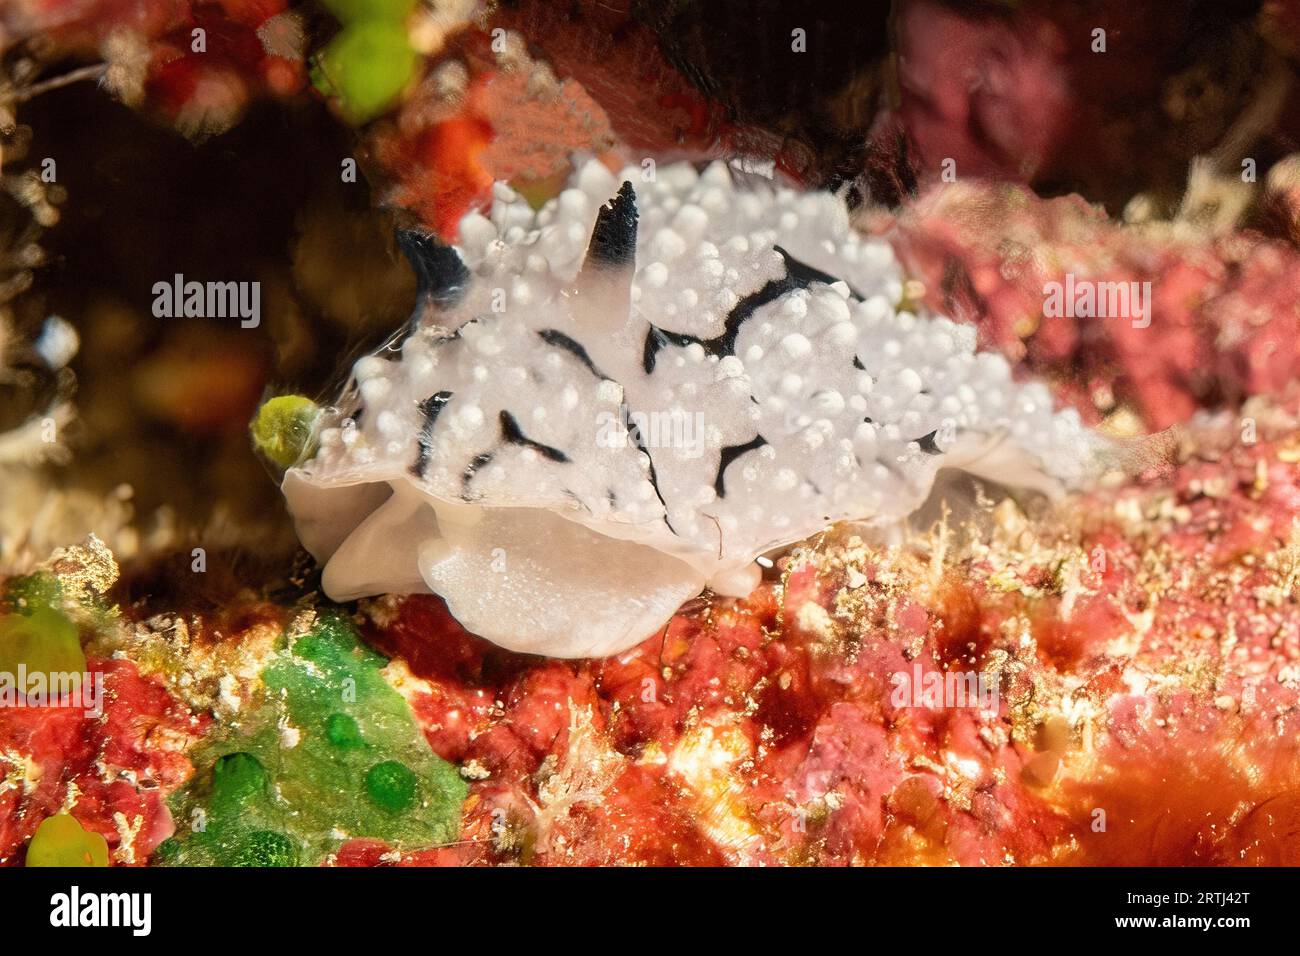 Extreme close-up frontal view of nudibranch marine snail warty snail (Phyllidiidae) crawling pber feeding on sponges, Pacific Ocean, Yap Island, Yap Stock Photo